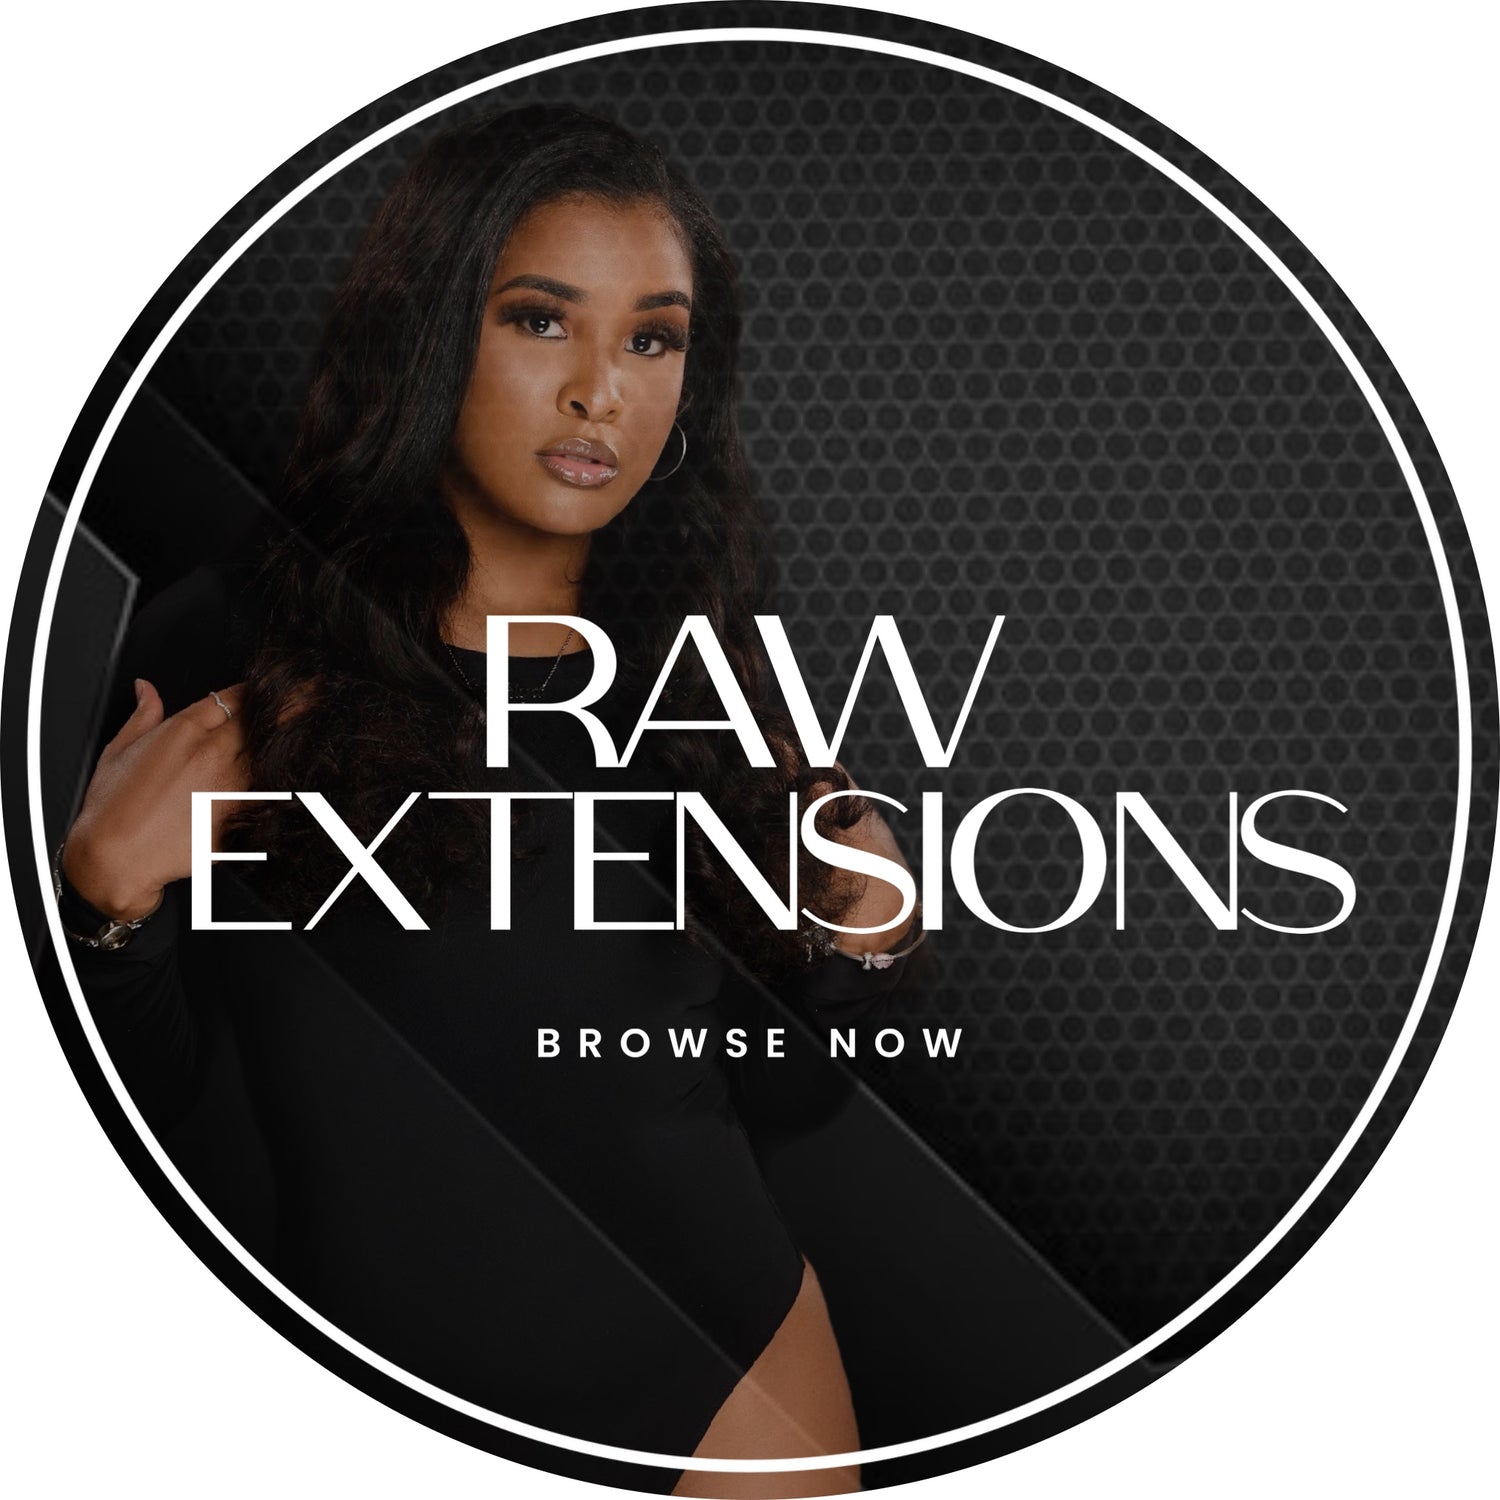 RAW EXTENSIONS